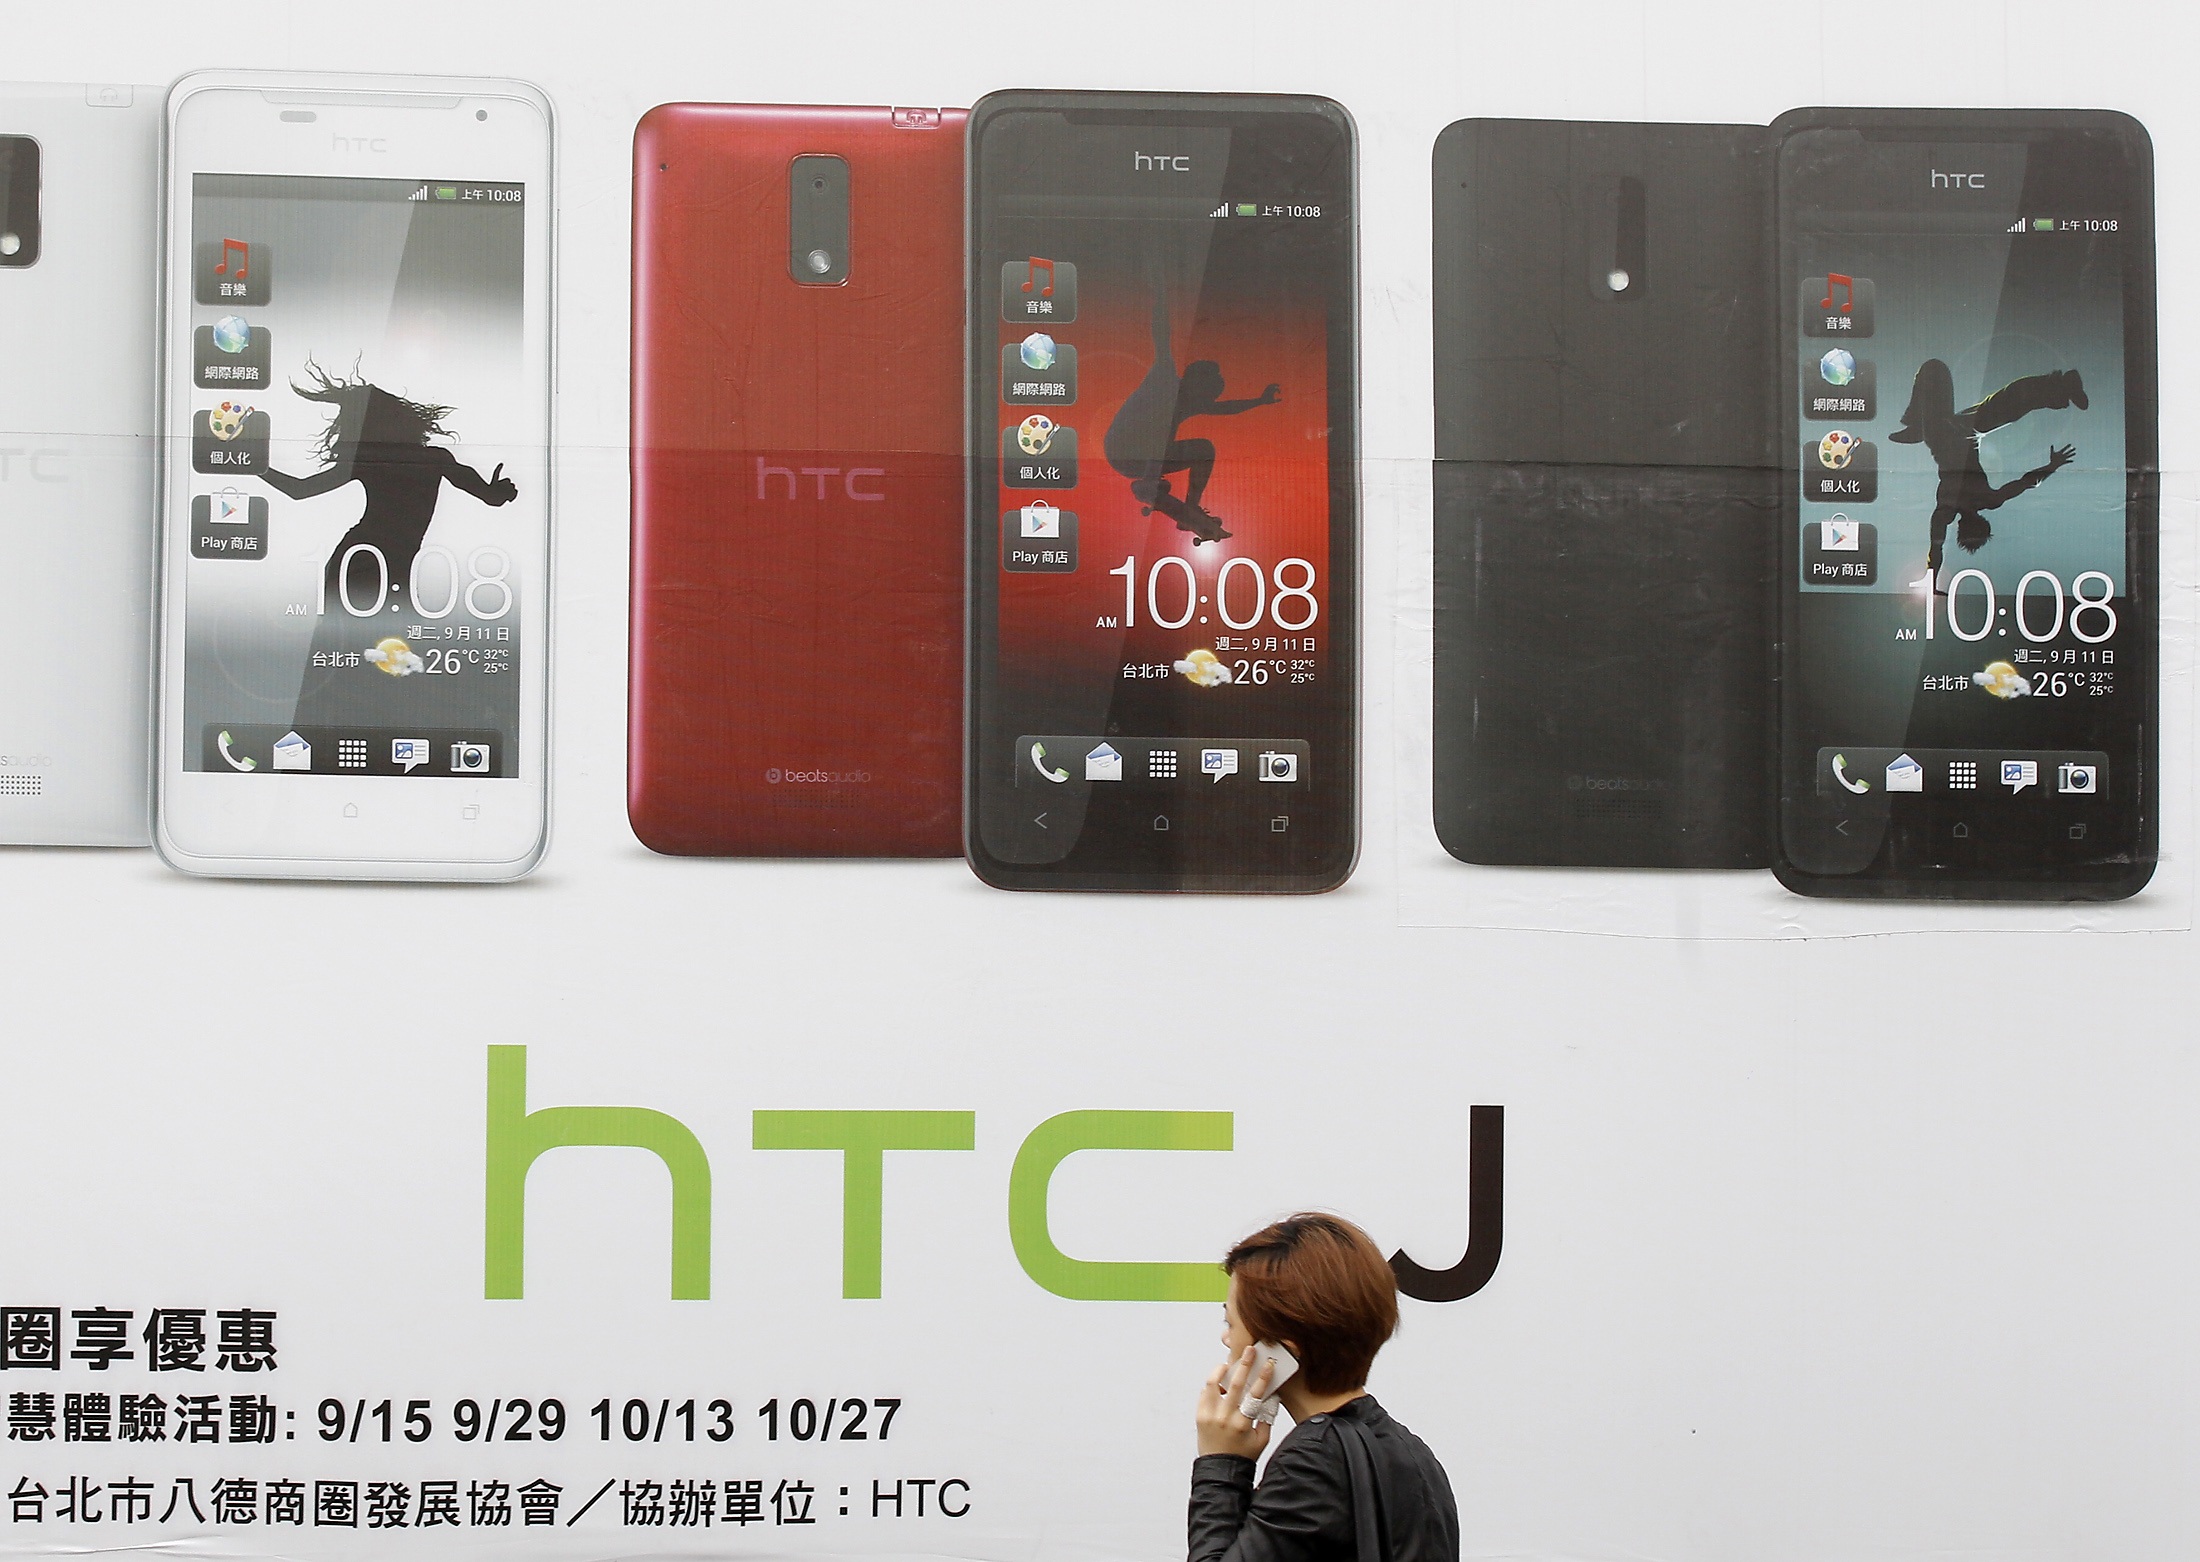 Despite award-winning smartphones, HTC is finding it hard to keep up with its nemeses Samsung and Apple. Photo: Reuters